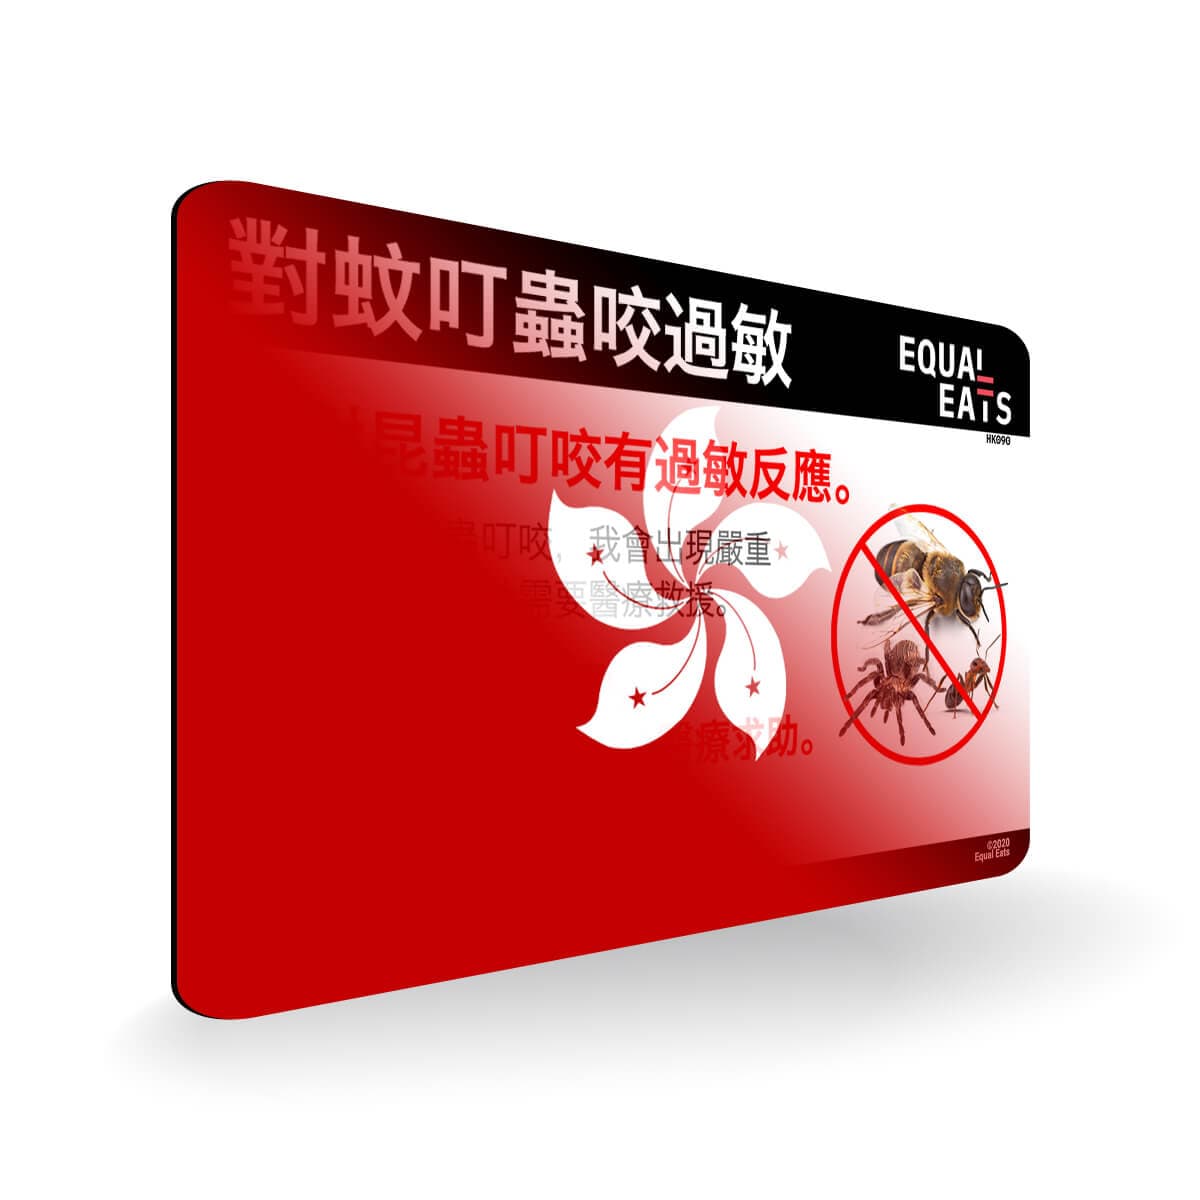 Insect Sting Allergy in Traditional Chinese. Bee Sting Allergy Card for Hong Kong